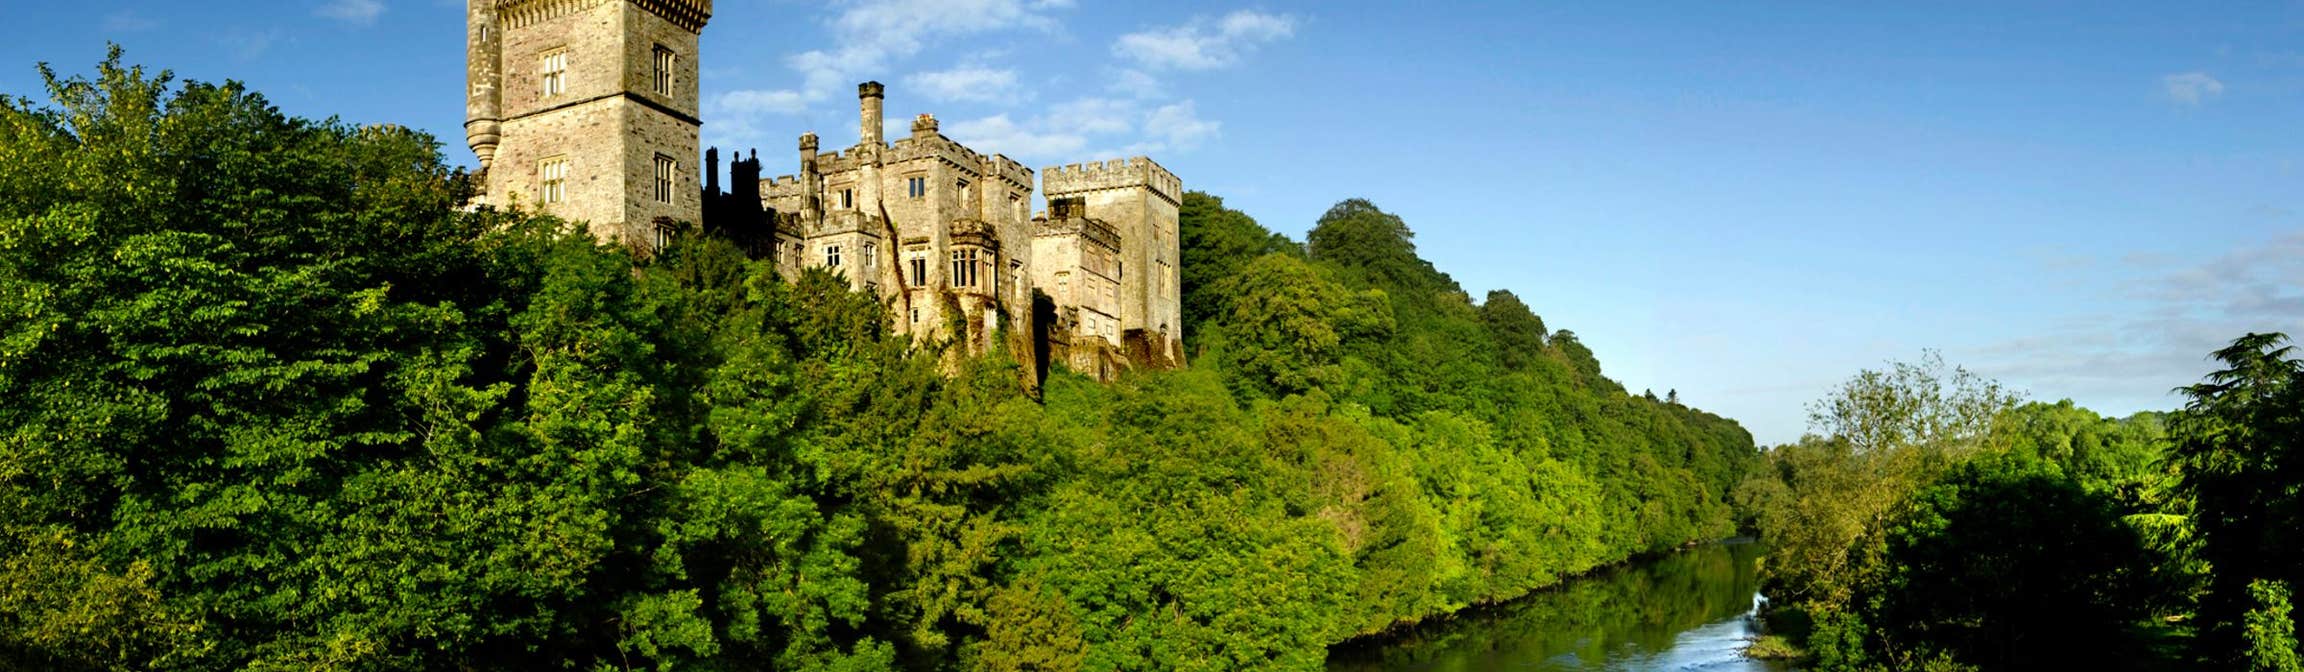 Image of Lismore Castle in County Waterford